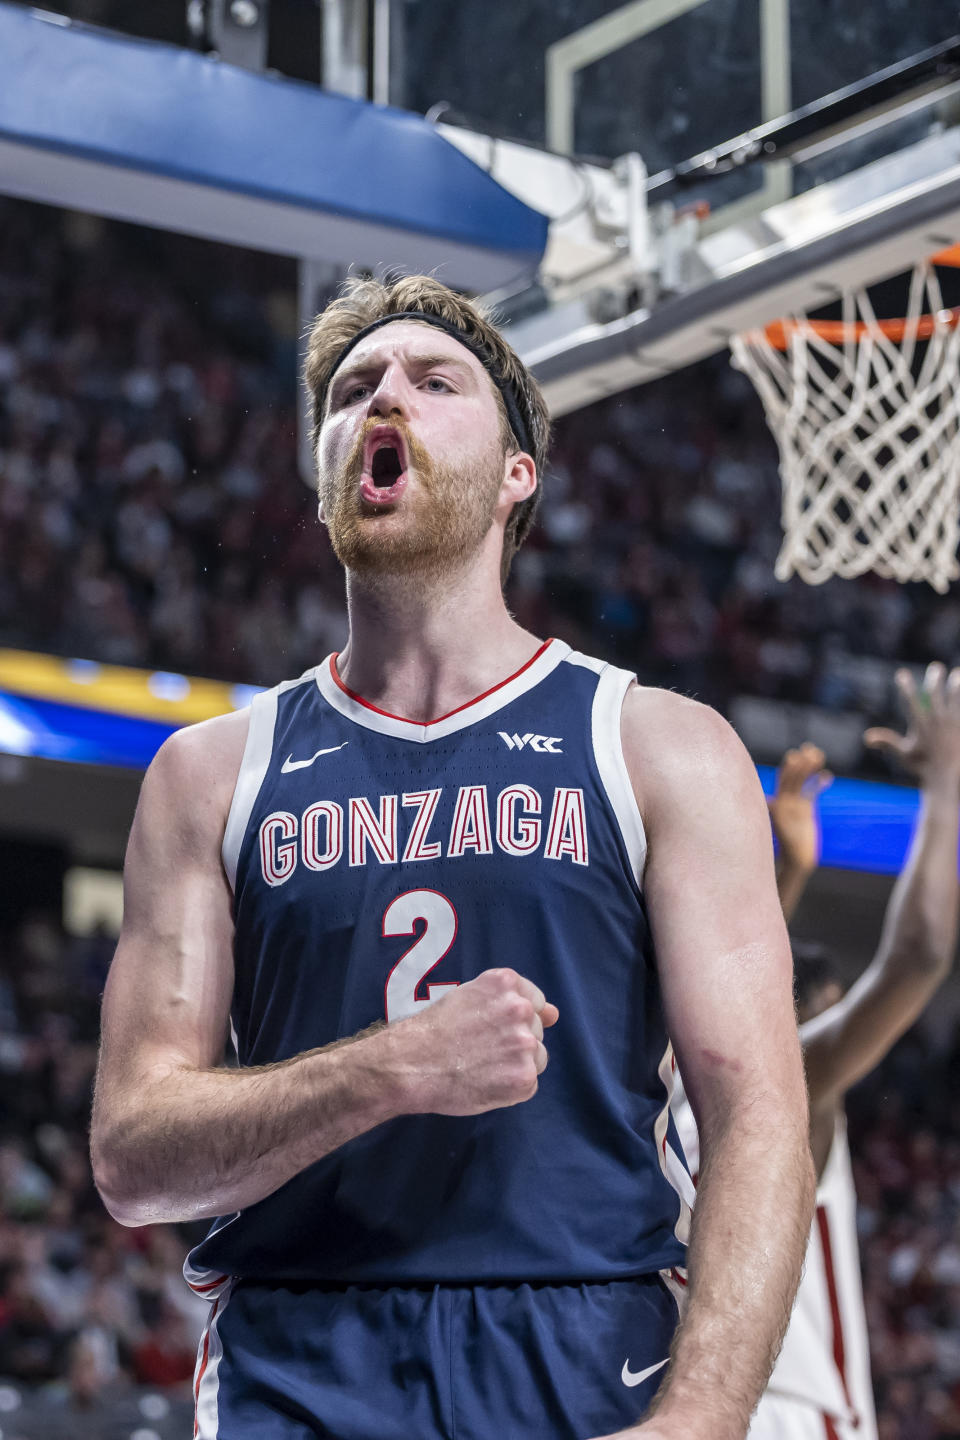 Gonzaga forward Drew Timme (2) reacts after scoring against Alabama during the second half of an NCAA college basketball game, Saturday, Dec. 17, 2022, in Birmingham, Ala. (AP Photo/Vasha Hunt)